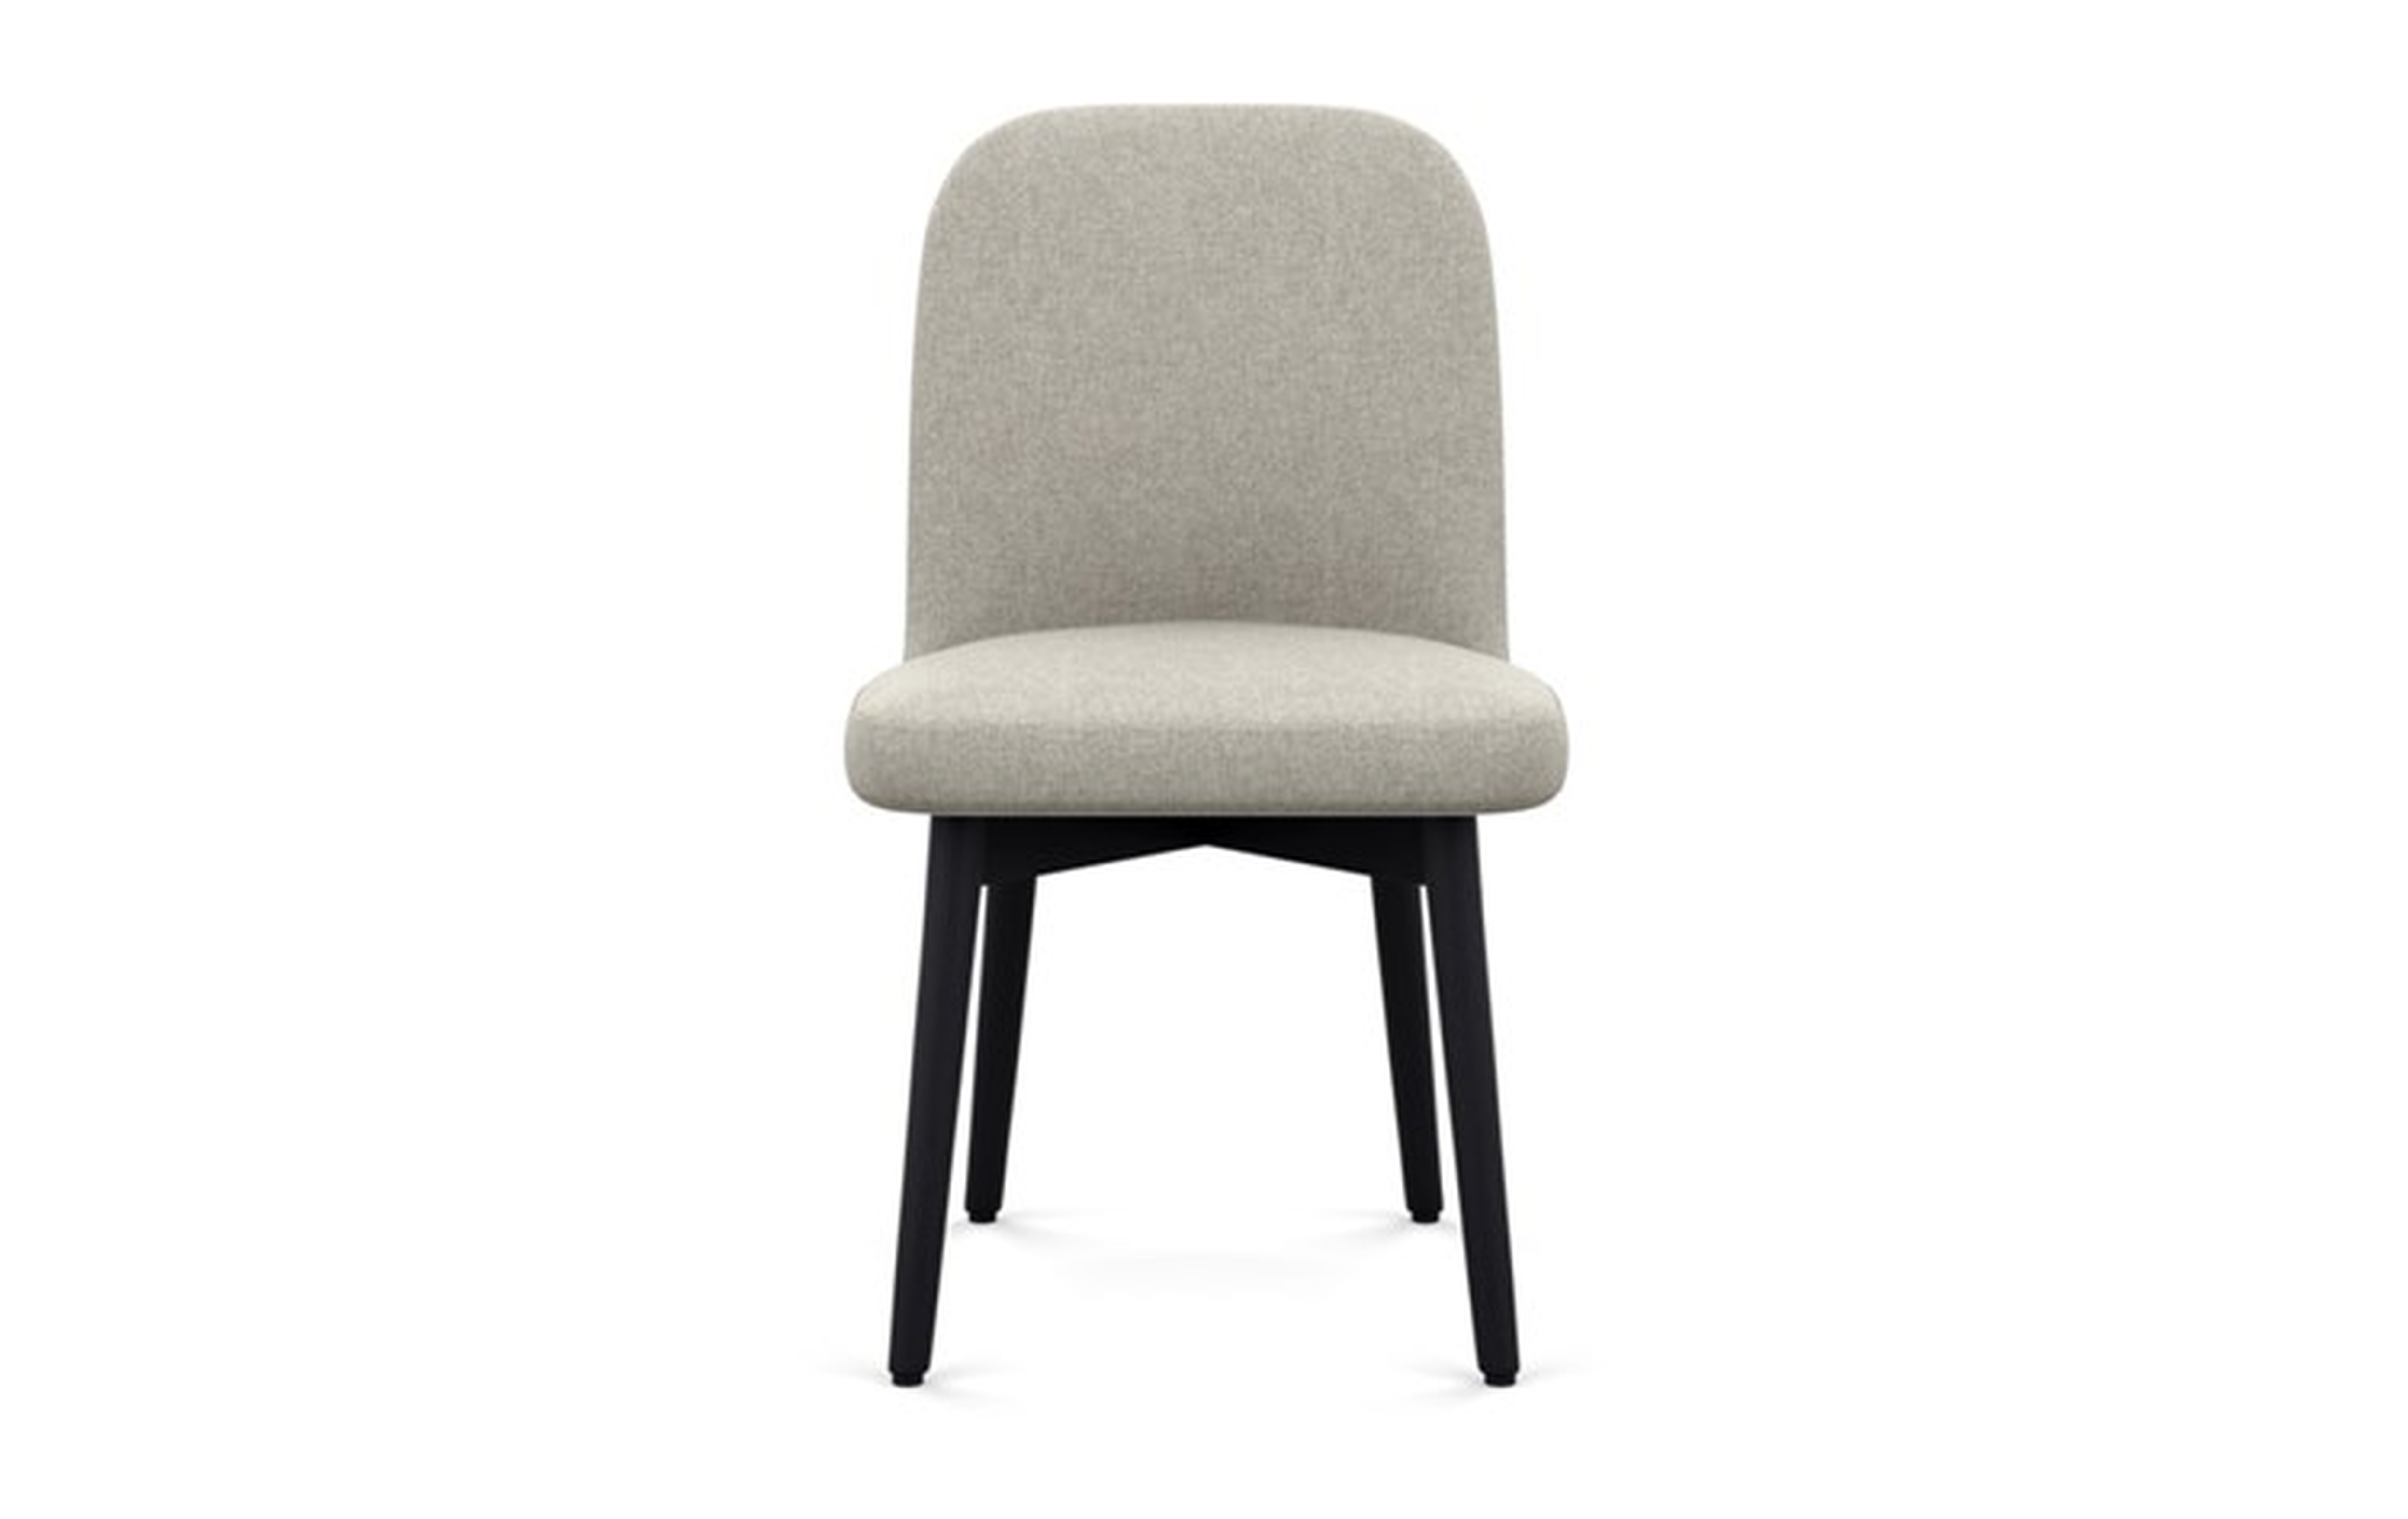 Dylan Dining Chair with Dune Fabric and Matte Black legs - Interior Define